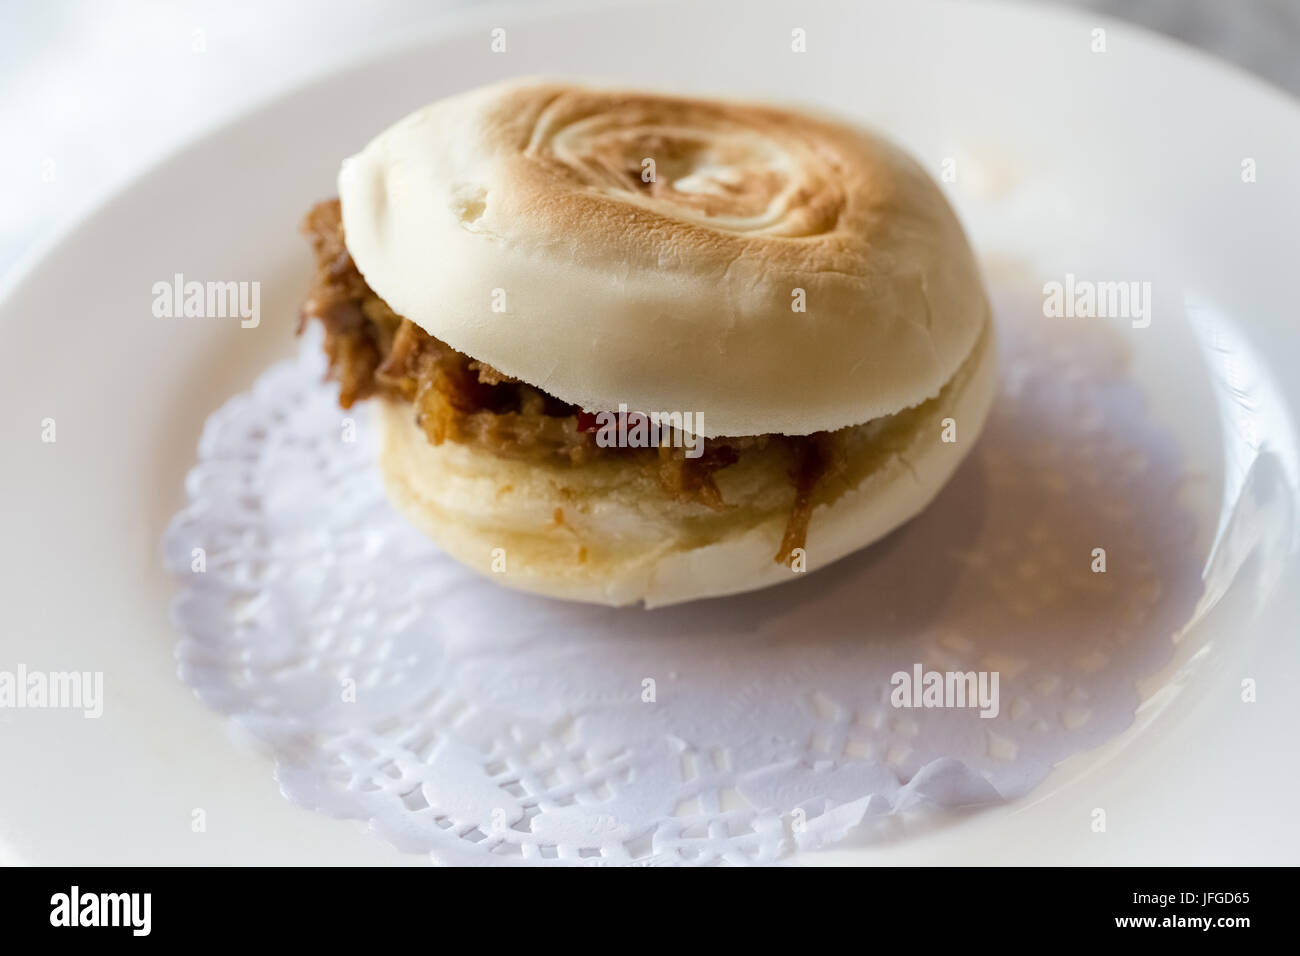 marinated meat in baked bun Stock Photo